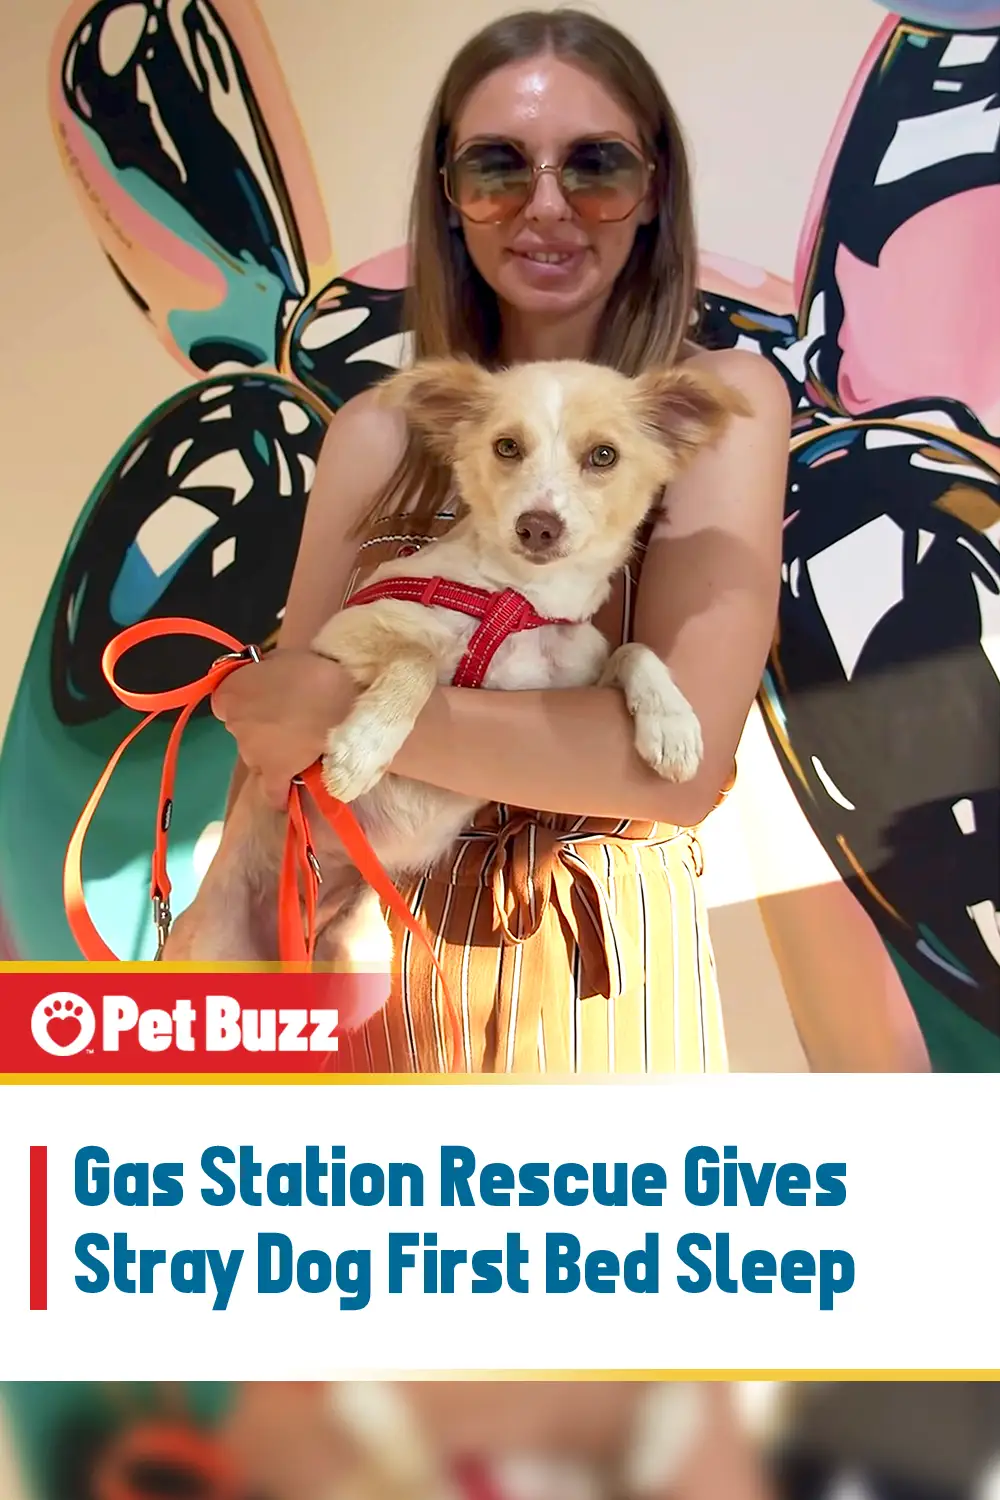 Gas Station Rescue Gives Stray Dog First Bed Sleep